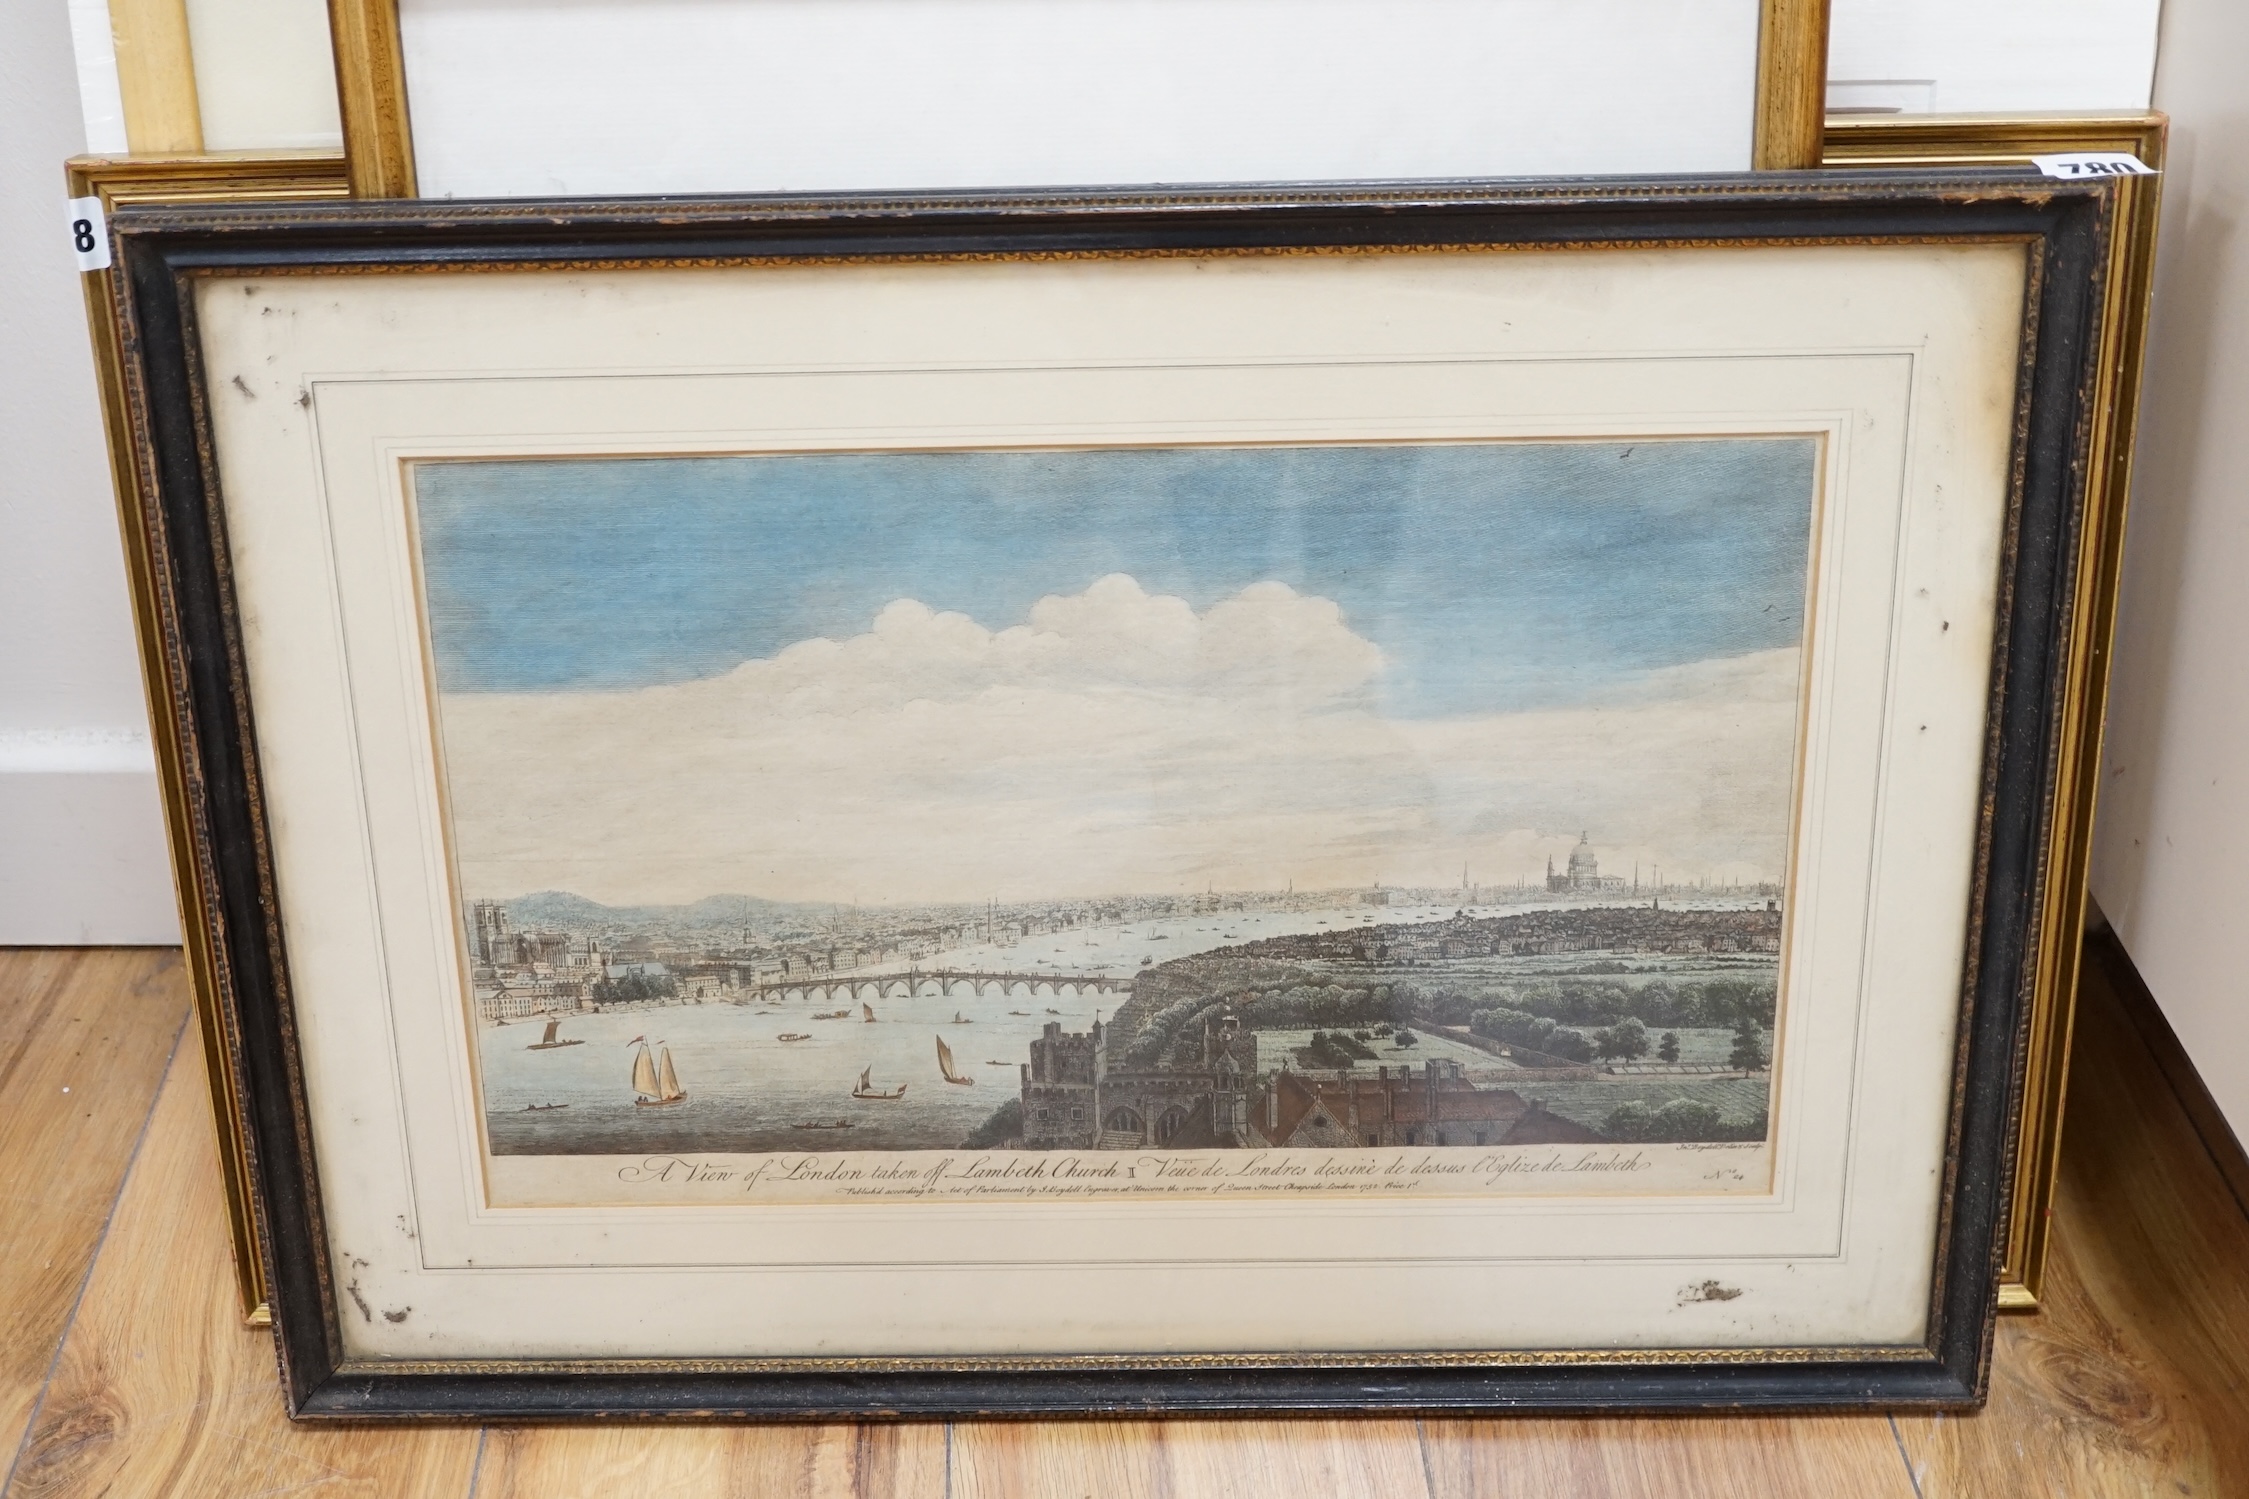 After Boydell, hand coloured engraving, 'A View of London taken off Lambeth Church 1752', 25 x 42cm. Condition - poor